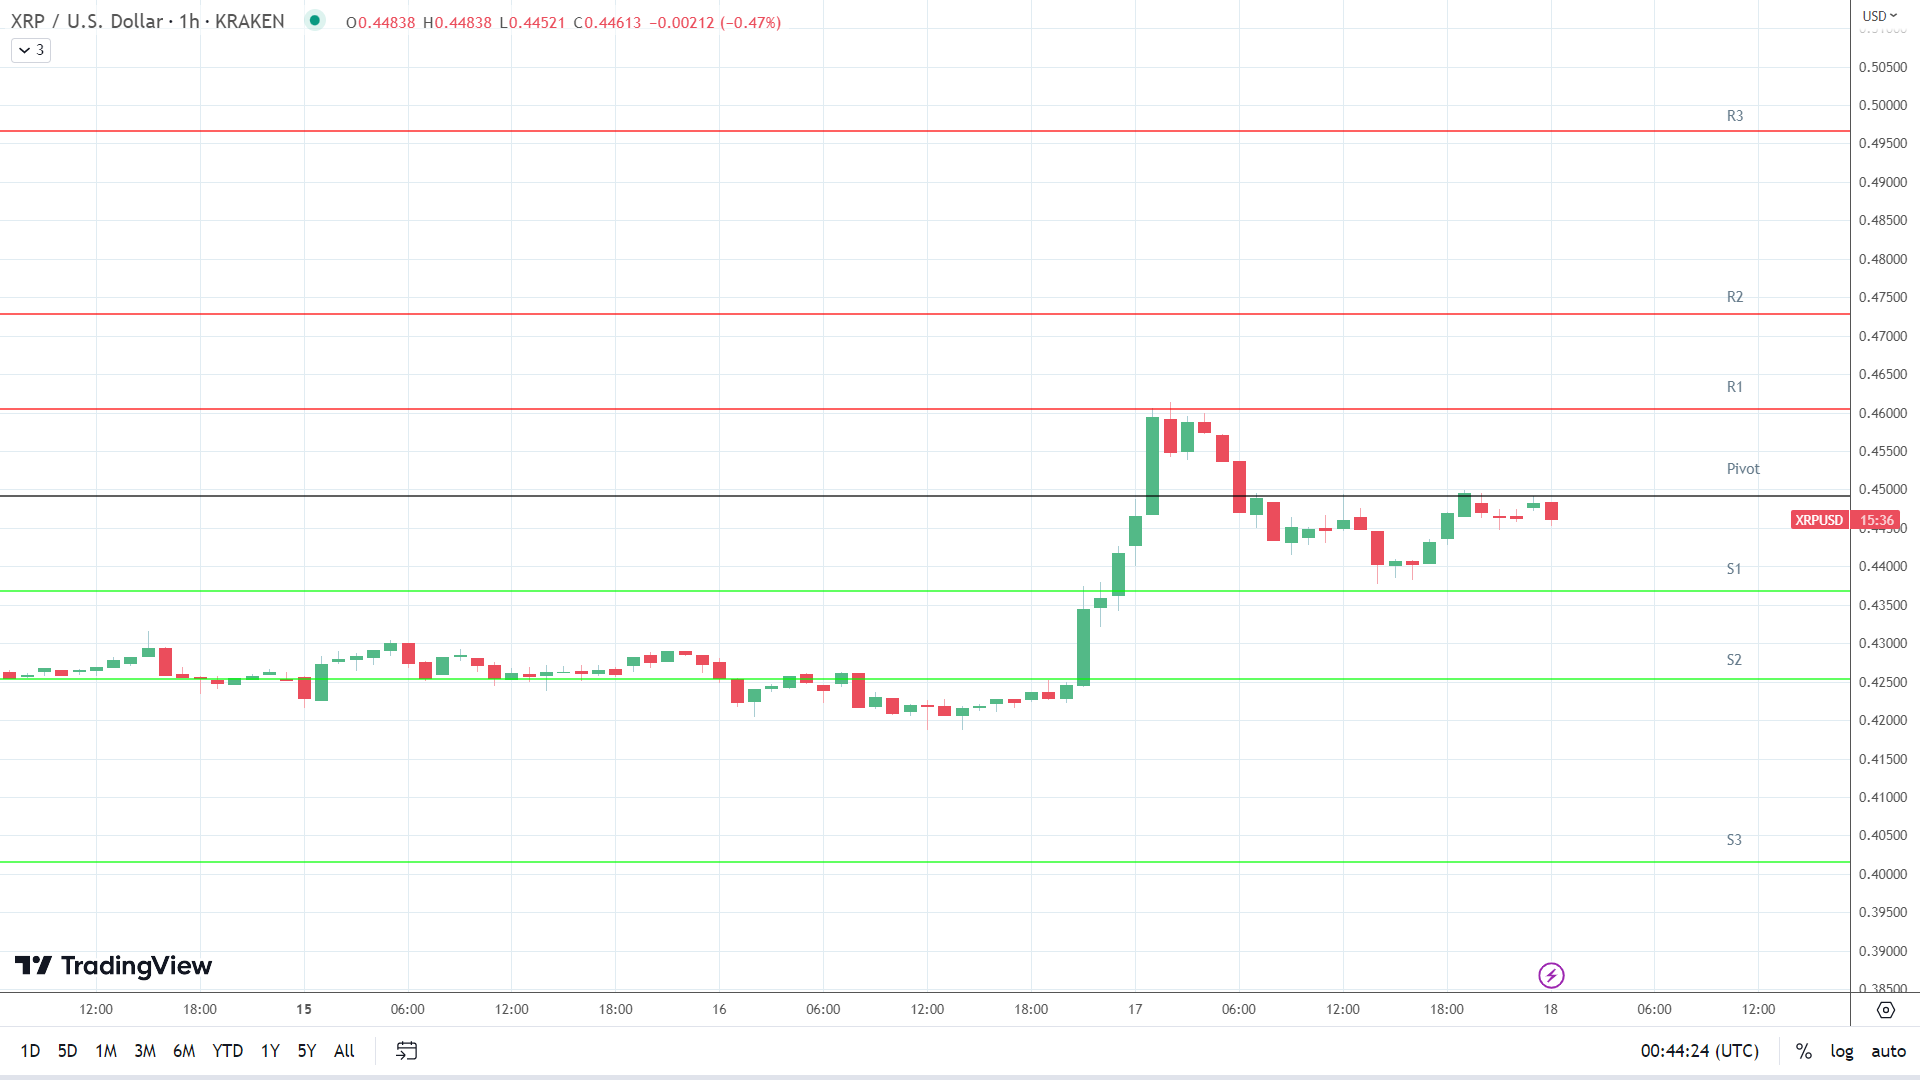 XRP support levels remain in play below the pivot.